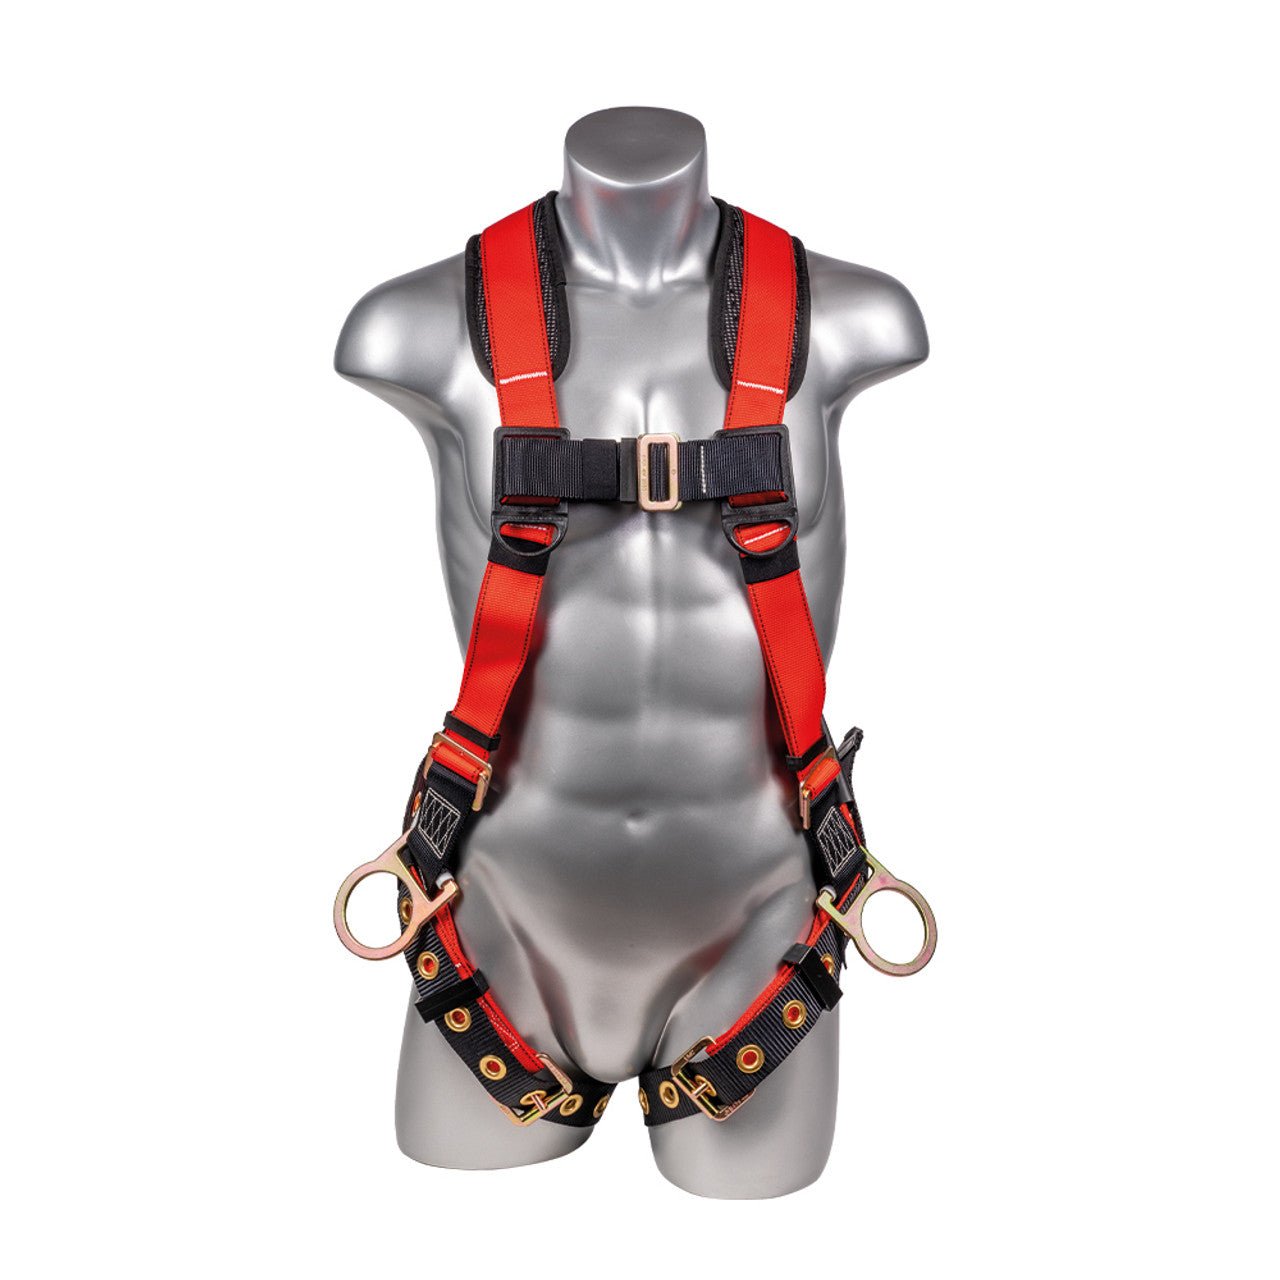 Construction Safety Harness 5 Point, Grommet Legs, Padded Back, Red